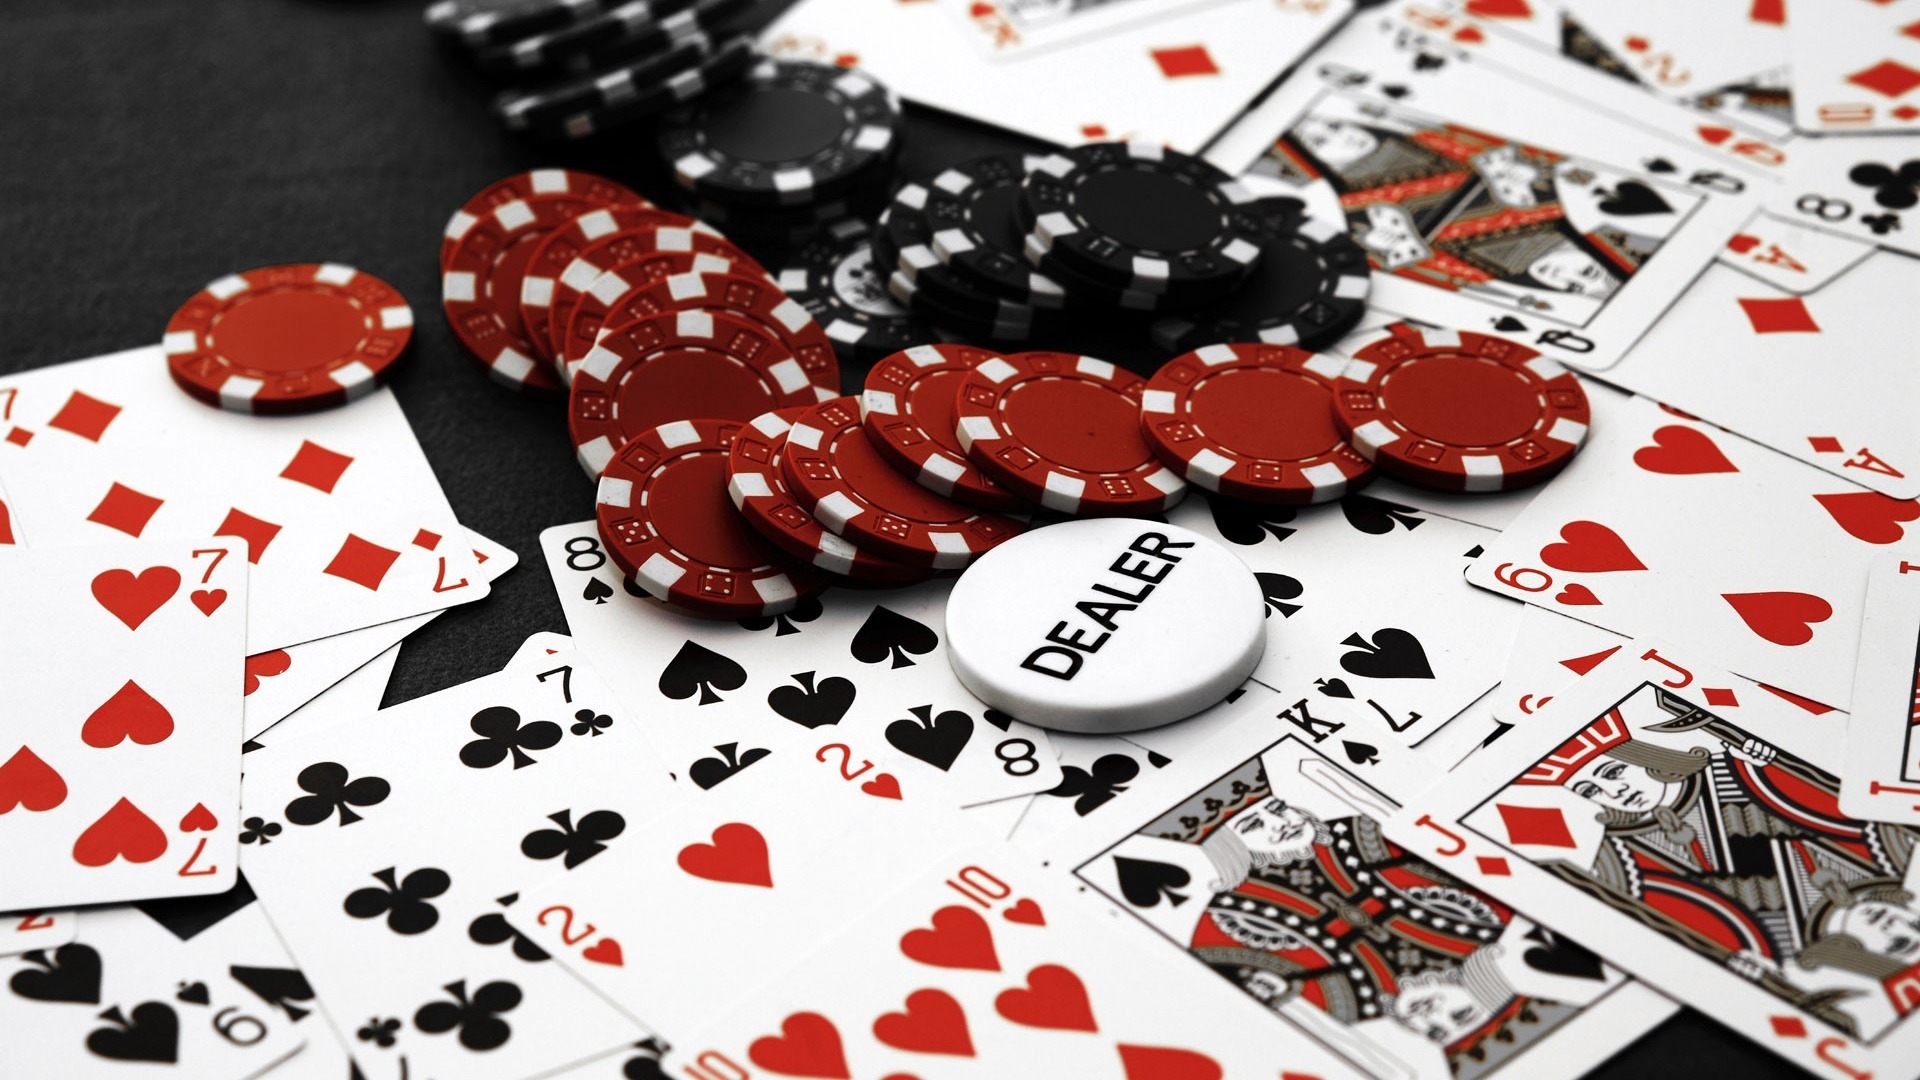 How To Calculate Equity In Poker